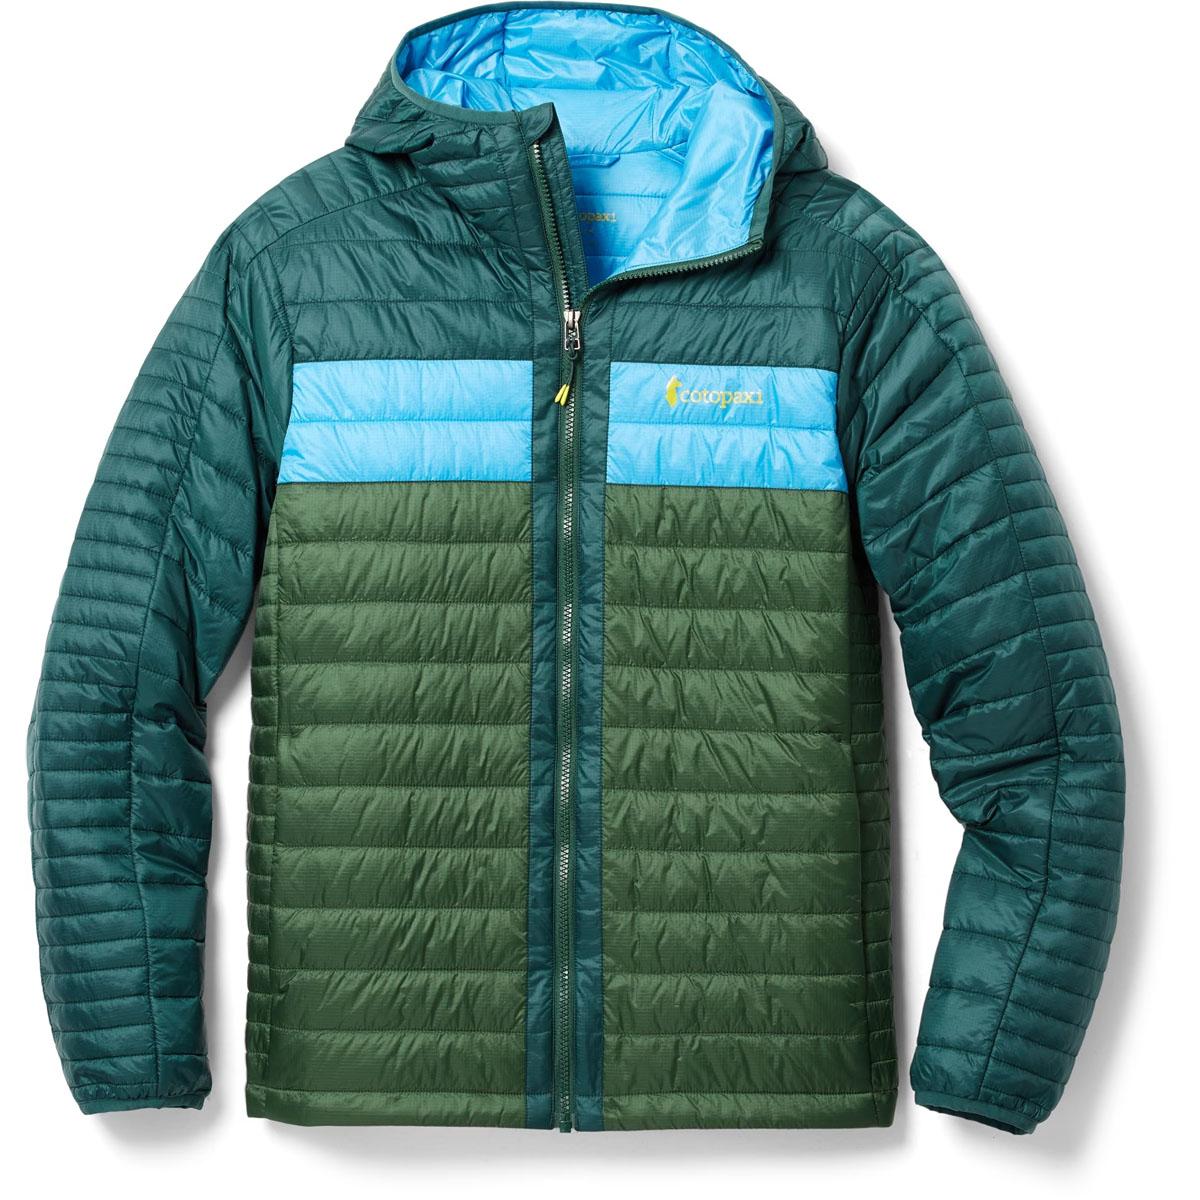 Cotopaxi Capa Hooded Insulated Jacket for $93.83 Shipped